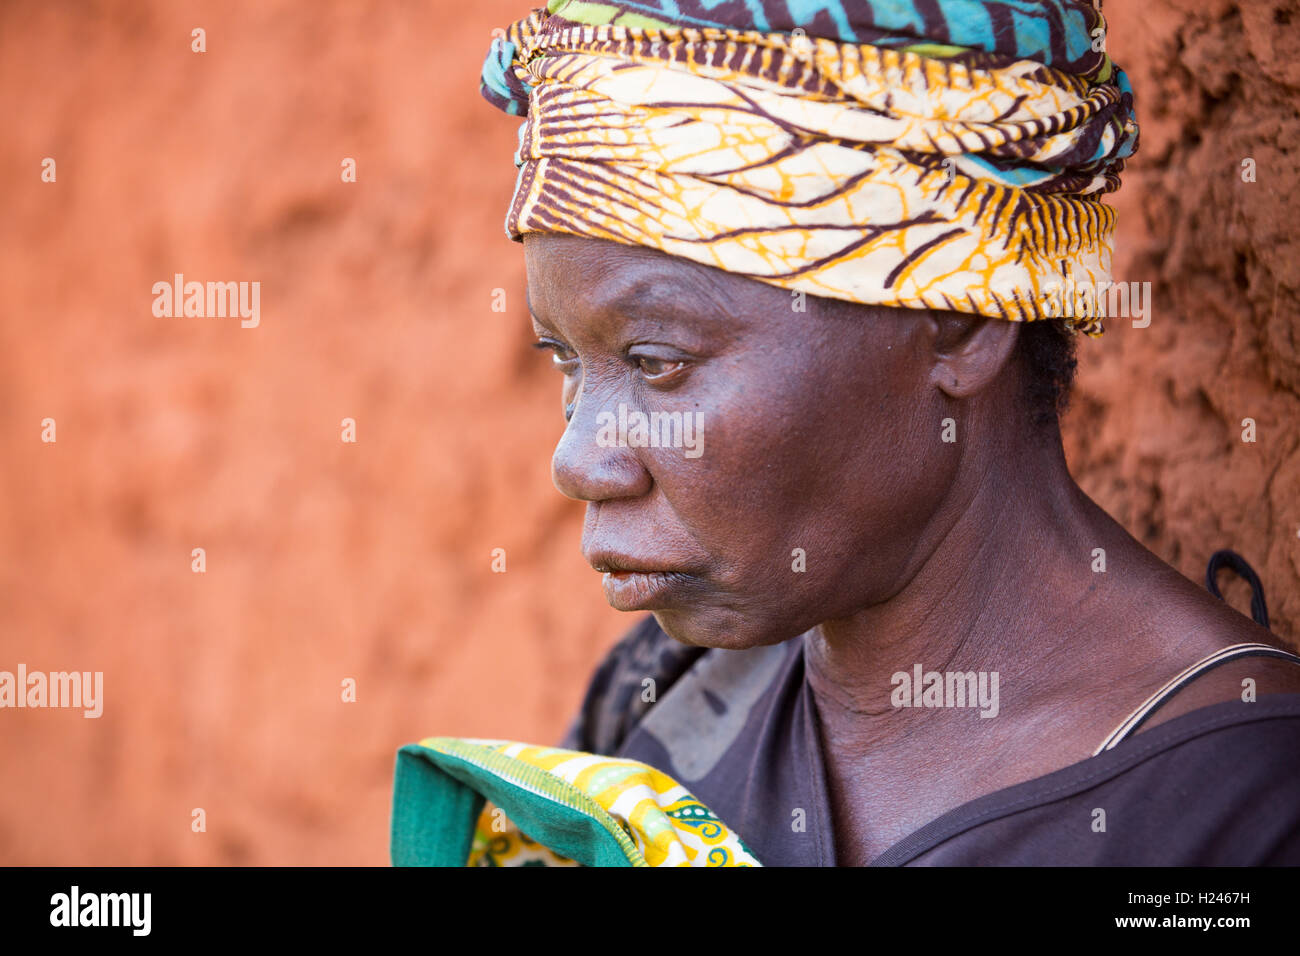 Namina village, Nampula Province, Mozambique, August 2015:  Maria Albino, 42, at home. She is blind with bilateral cataracts and needs help to do most tasks. Photo by Mike Goldwater Stock Photo